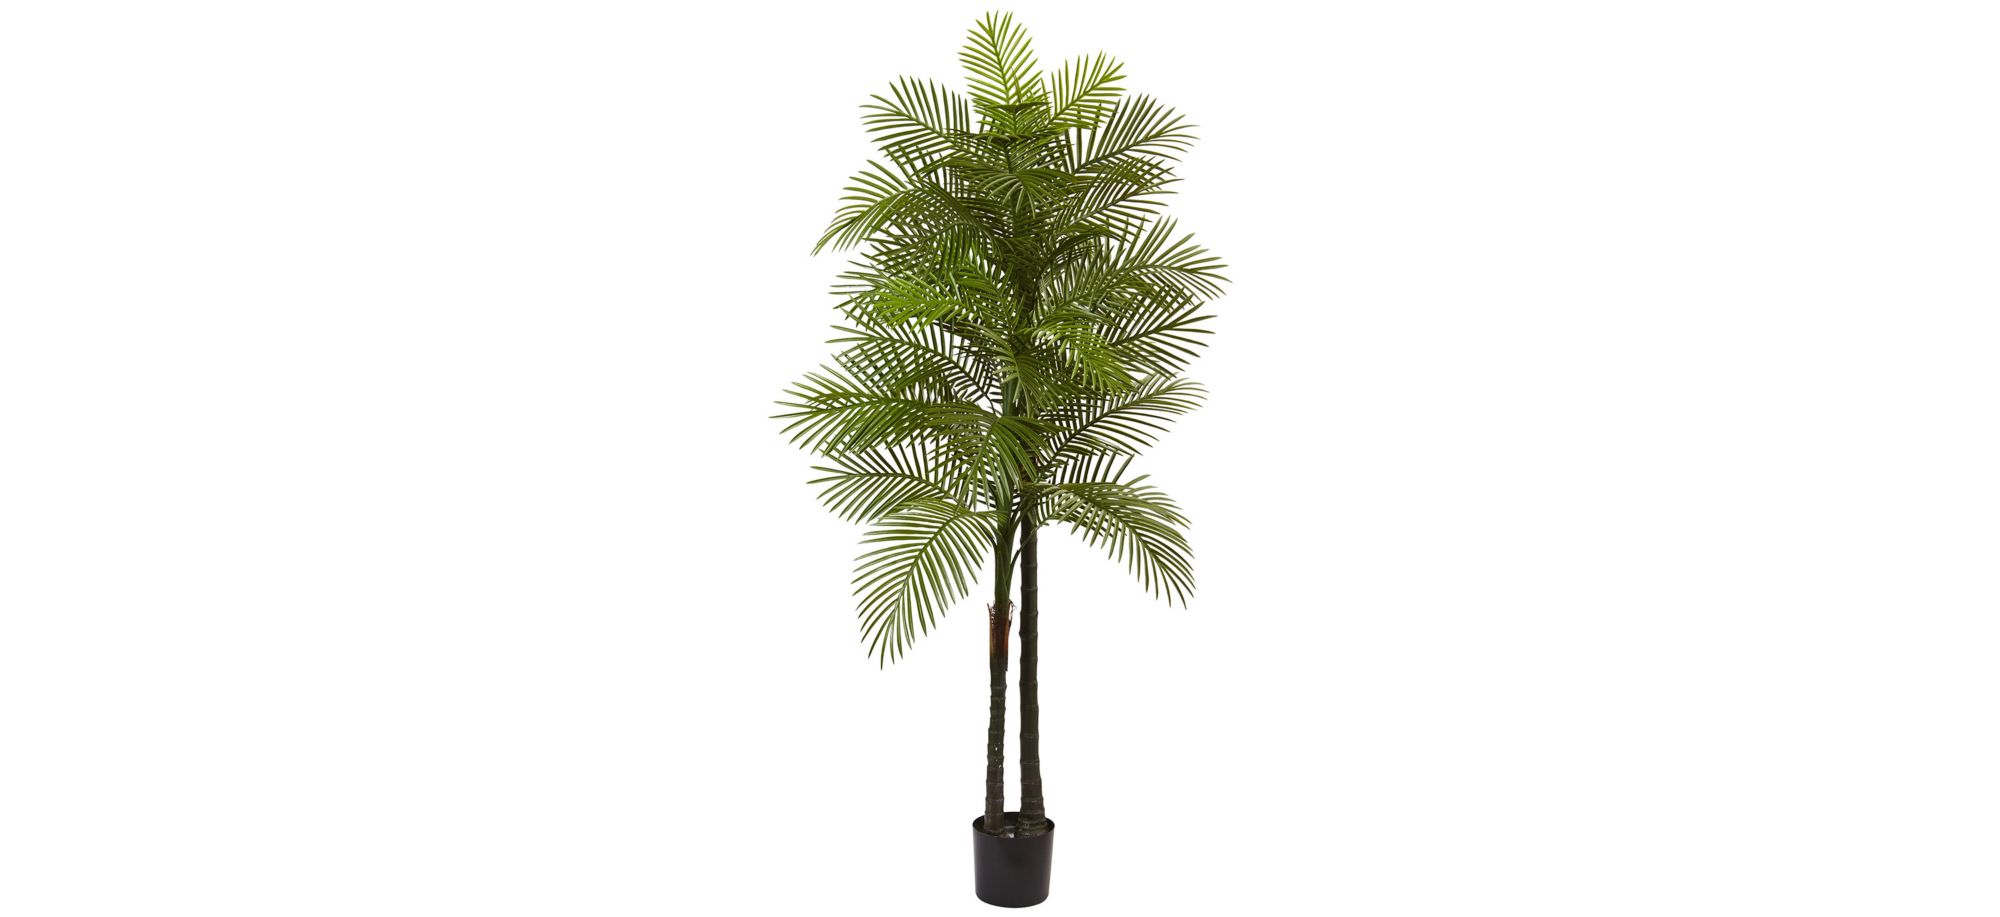 Double Robellini Palm Artificial Tree (Indoor/Outdoor) in Green by Bellanest